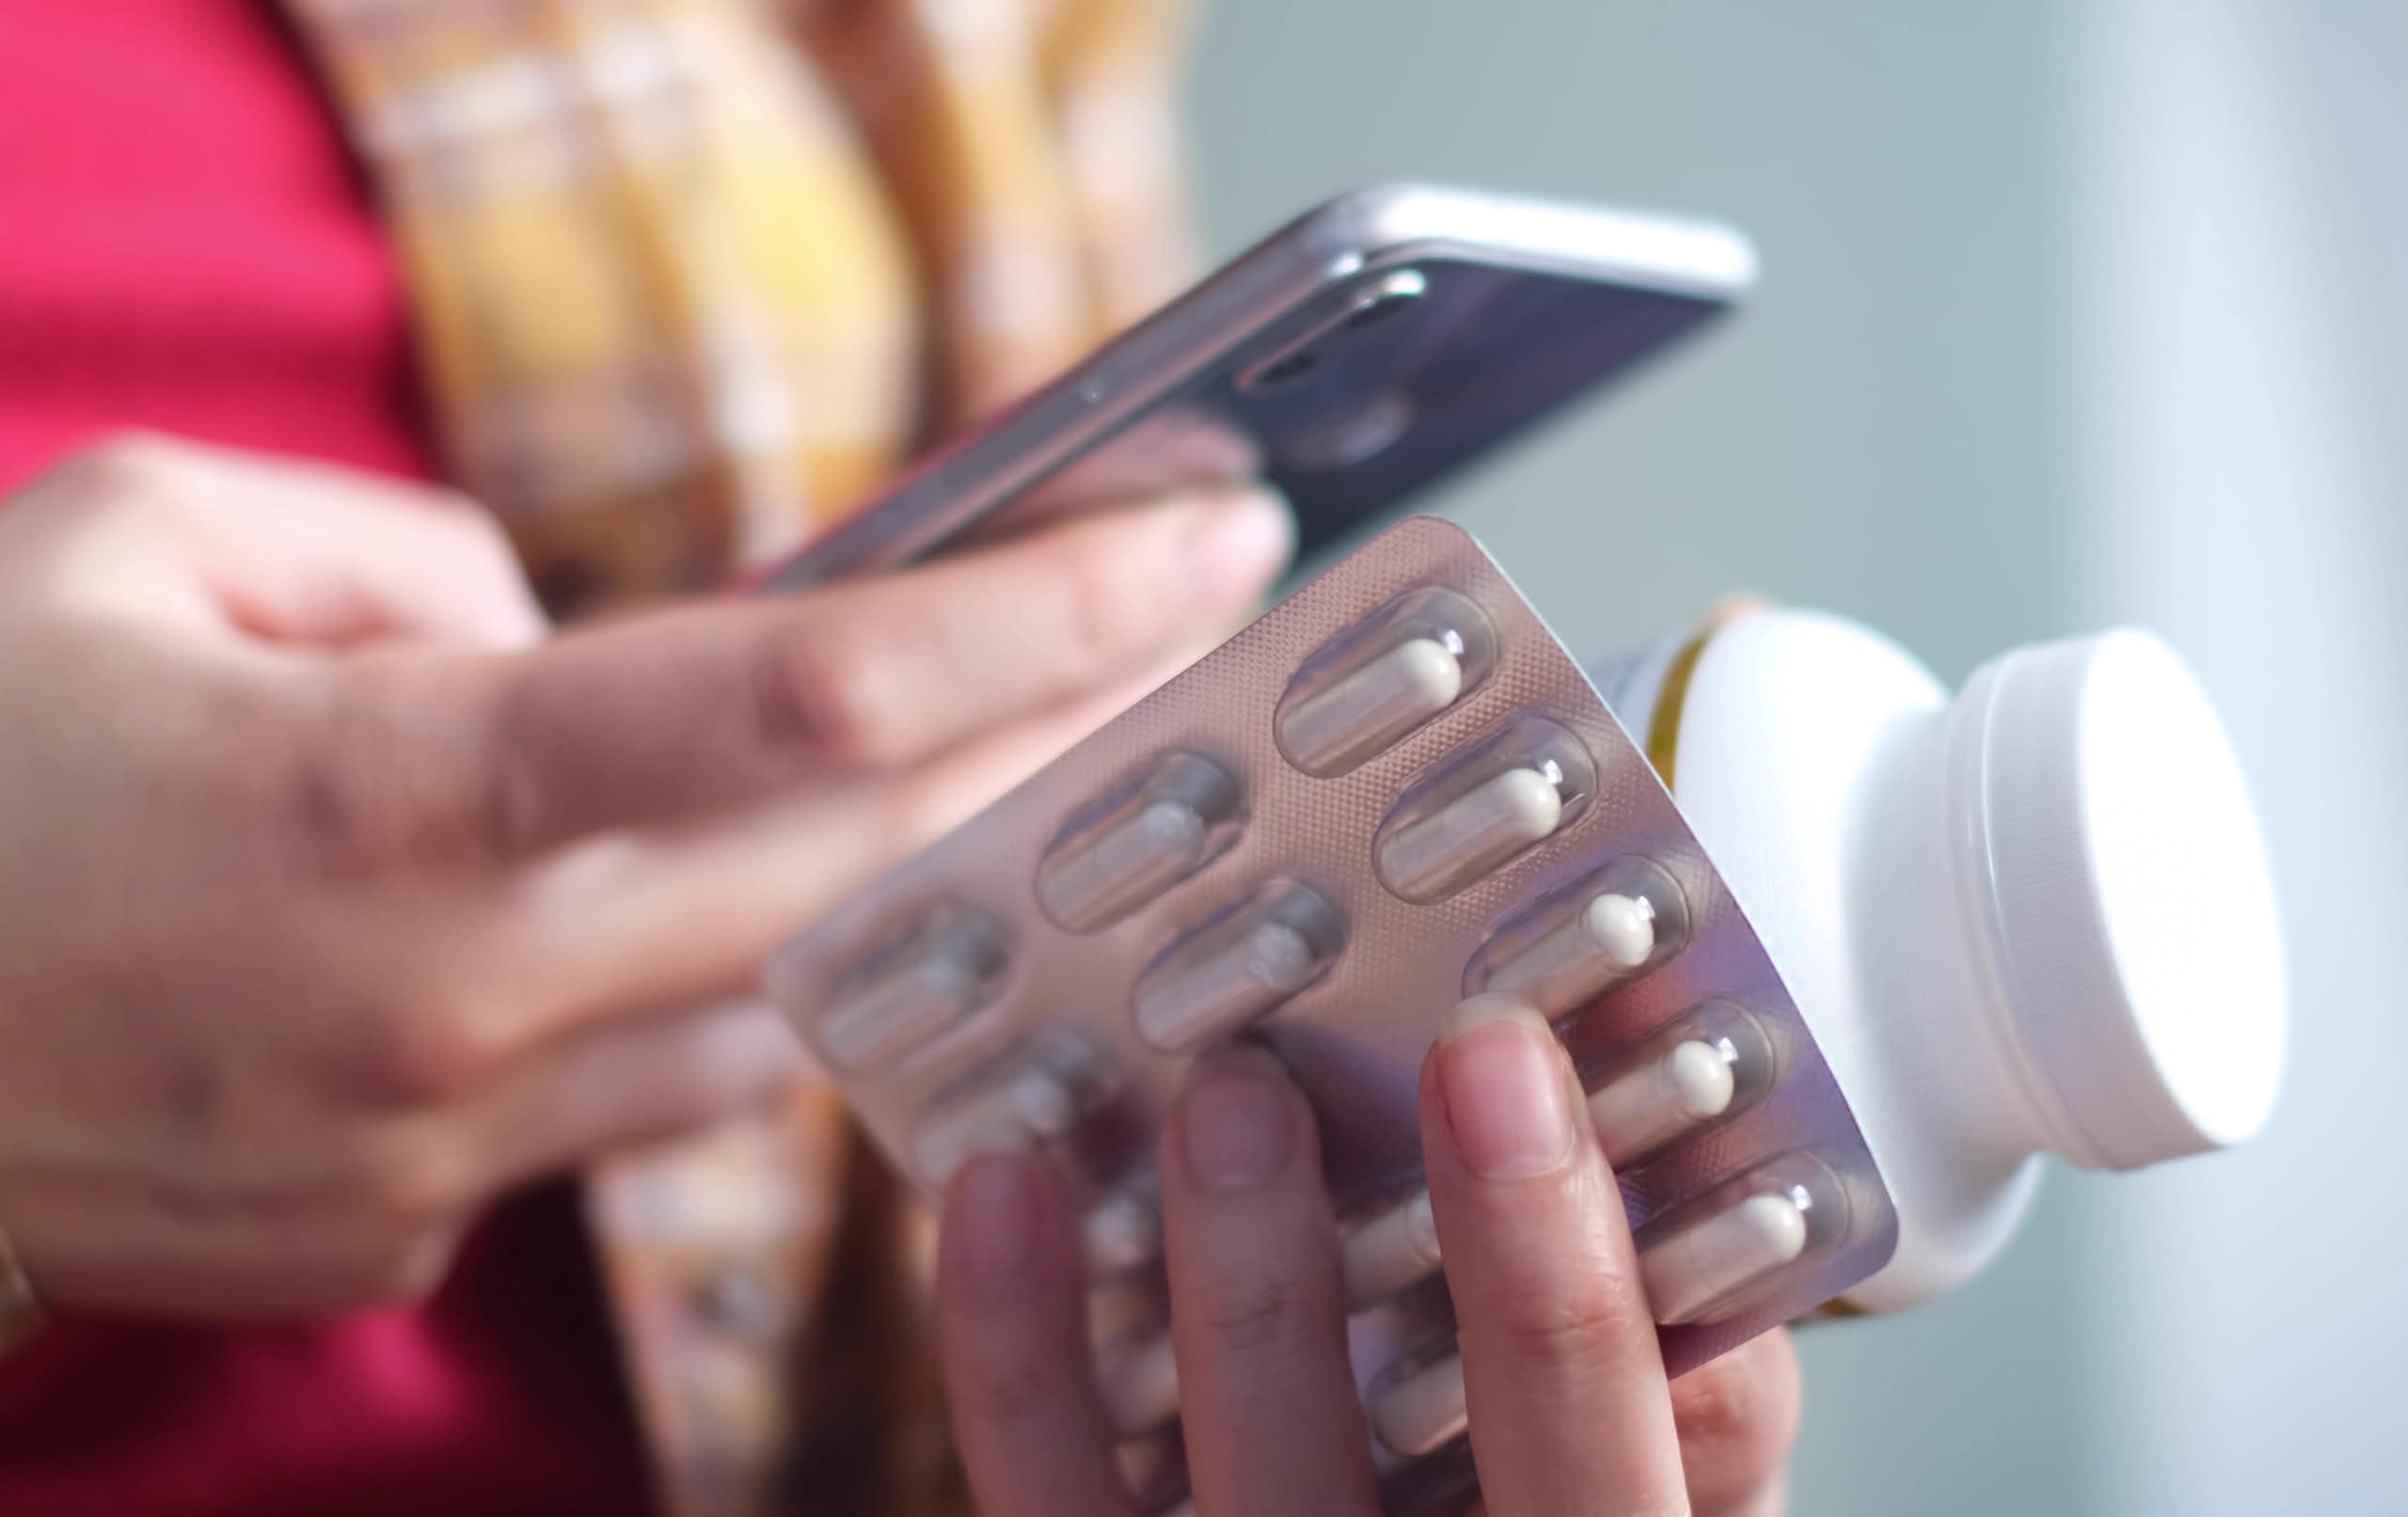 Close-up of a woman's hands holding a smartphone and some medications.